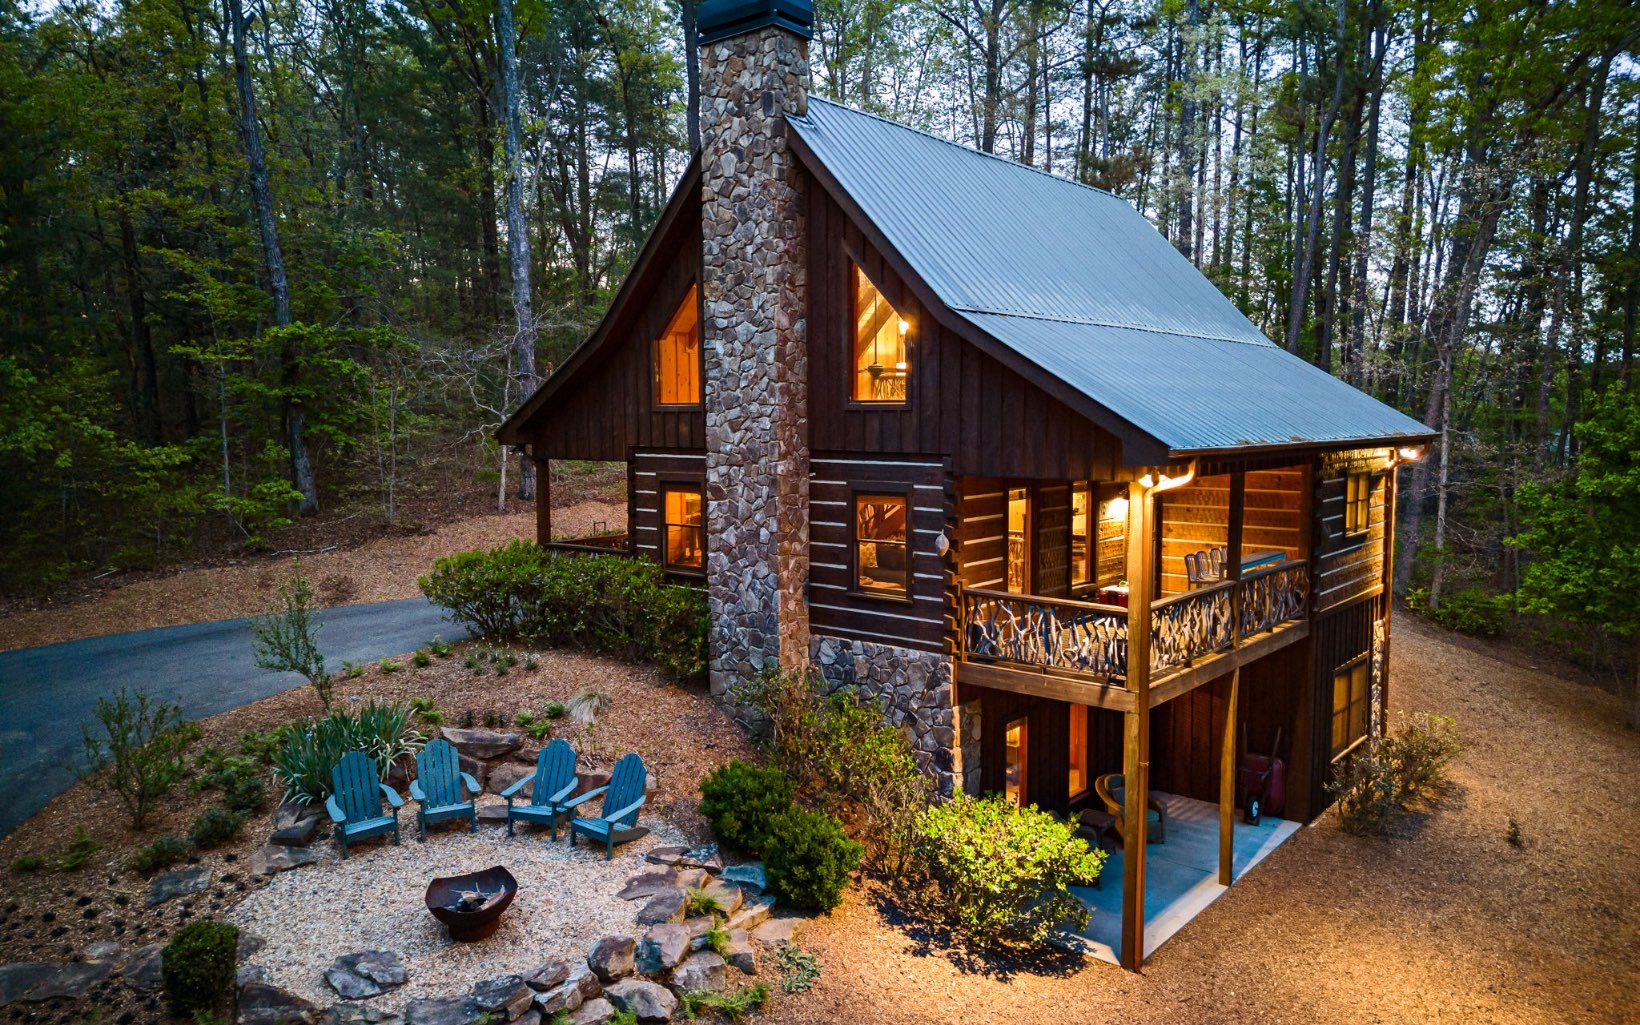 Welcome to White Oaks—a private mountain community located minutes from downtown Blue Ridge, hiking trails, kayaking, and a Golf Digest award winning gold course. This rustic setting provides the backdrop to BLUE RIDGE TIME cabin, where time stands still and one can breathe freedom. Beautifully appointed, modern furnishings create a juxtaposition against the true log chink cabin to combine the old and the new. Upon entrance you are greeted with real Acacia hardwood floors throughout the home and local mountain laurel railings, Tom Dixon lighting, high wooden-beamed ceilings, and an open floor plan. Stay cozy by the crackling of the outdoor fireplace in the screened-in party porch, relax in the new model hot-tub, watch the fireflies from the garden sitting area, or enjoy the annual 4th of the July fireworks that can be seen from the back deck. A second level living space makes this perfect for entertaining or guests. This fully turn-key cabin can be short term rented while not in use. Property video available upon request.